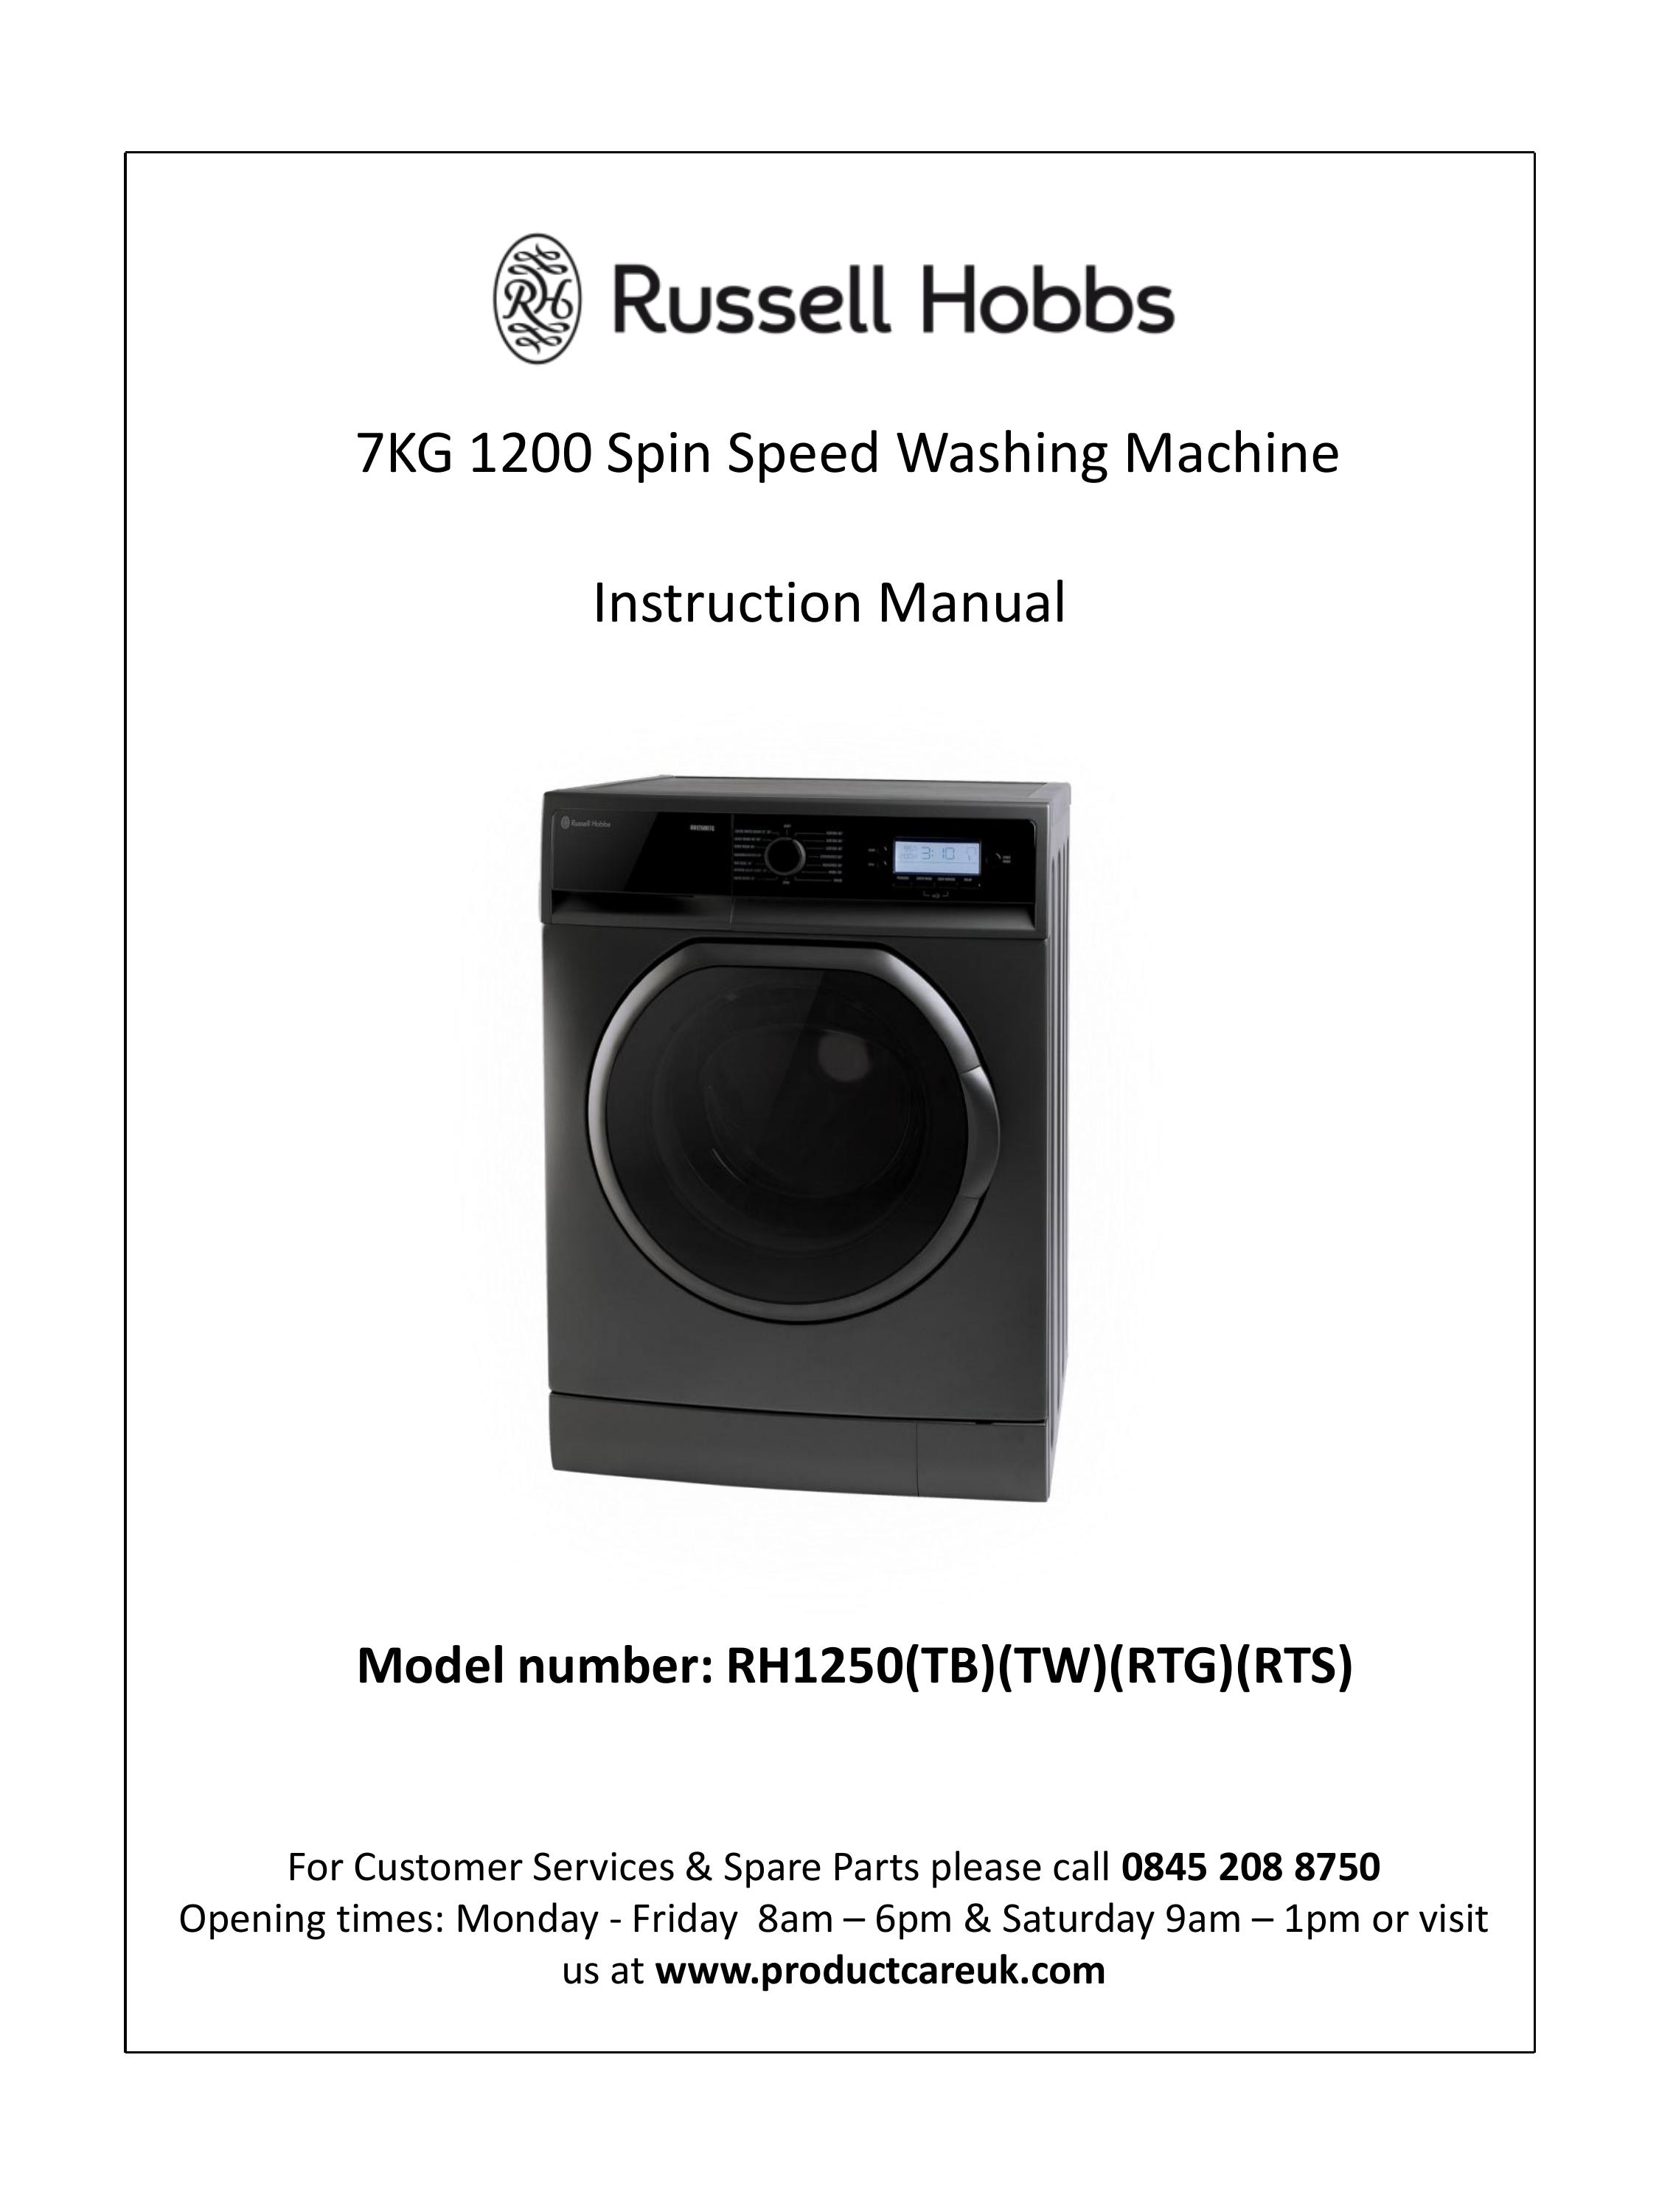 Russell Hobbs RH1250(TB)(TW)(RTG)(RTS) Washer/Dryer User Manual